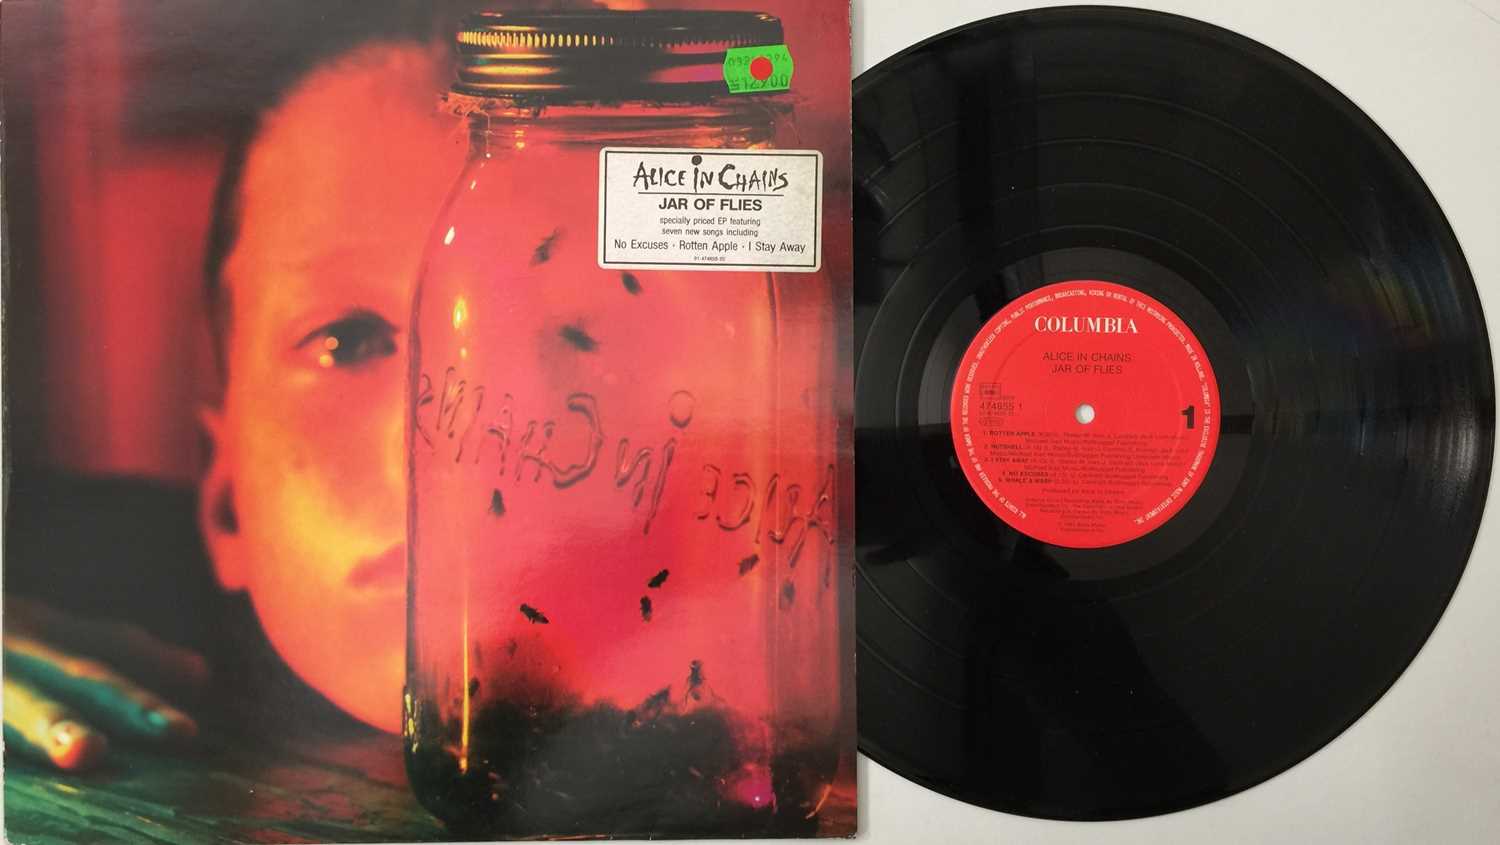 Lot 136 - ALICE IN CHAINS - JAR OF FLIES 12" (COLUMBIA 474855 1)